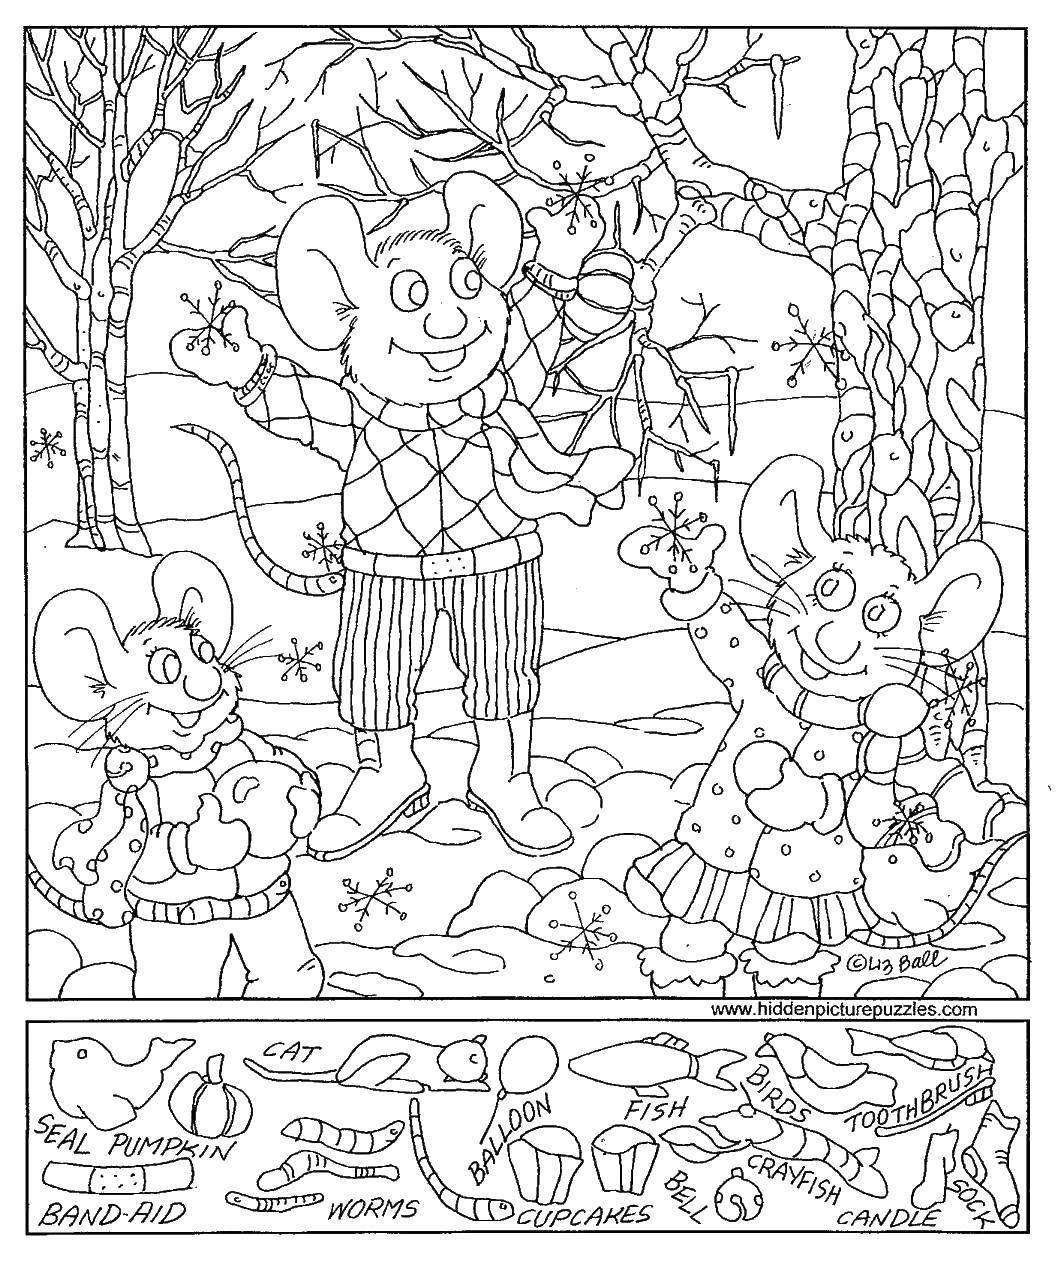 Coloring Mice and snowballs. Category Find items. Tags:  the mice , snowballs, trees, jackets.